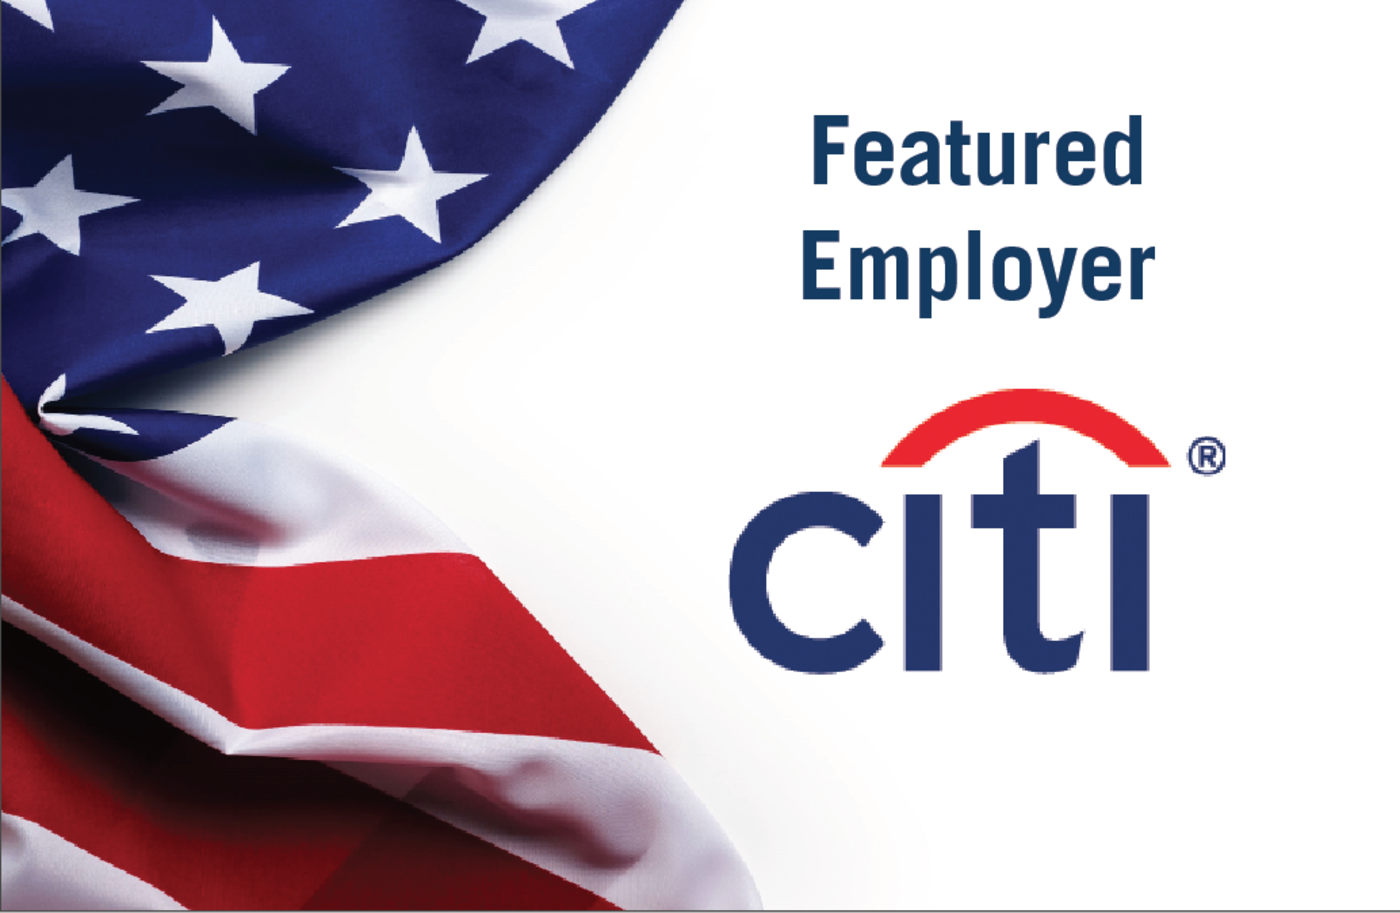 Hire Heroes USA Featured Employer: Citi